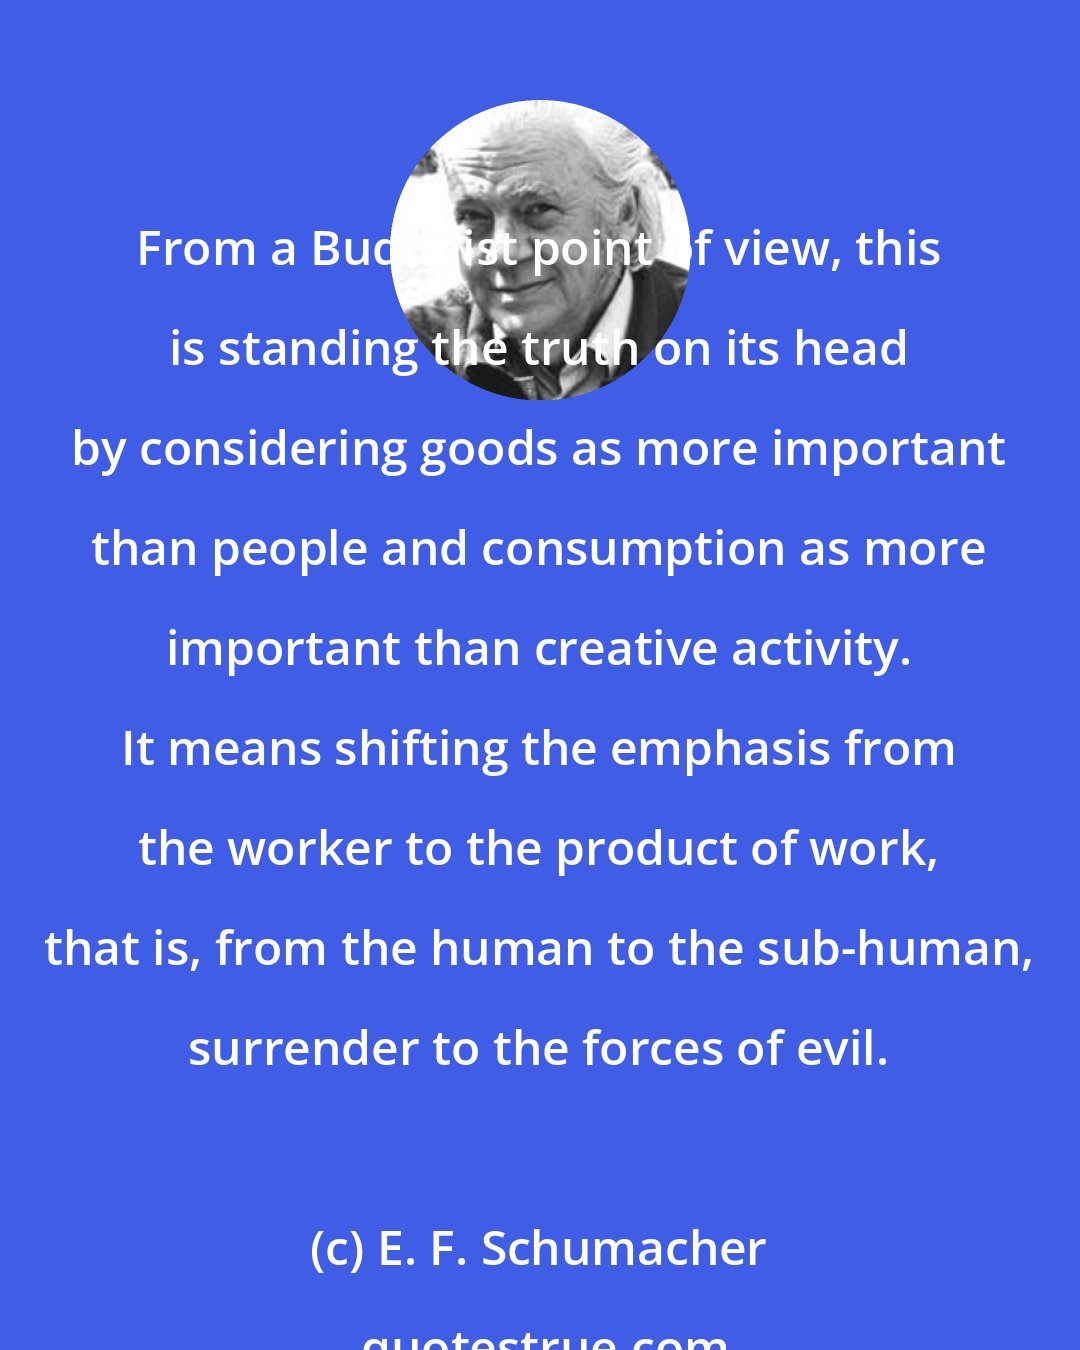 E. F. Schumacher: From a Buddhist point of view, this is standing the truth on its head by considering goods as more important than people and consumption as more important than creative activity. It means shifting the emphasis from the worker to the product of work, that is, from the human to the sub-human, surrender to the forces of evil.